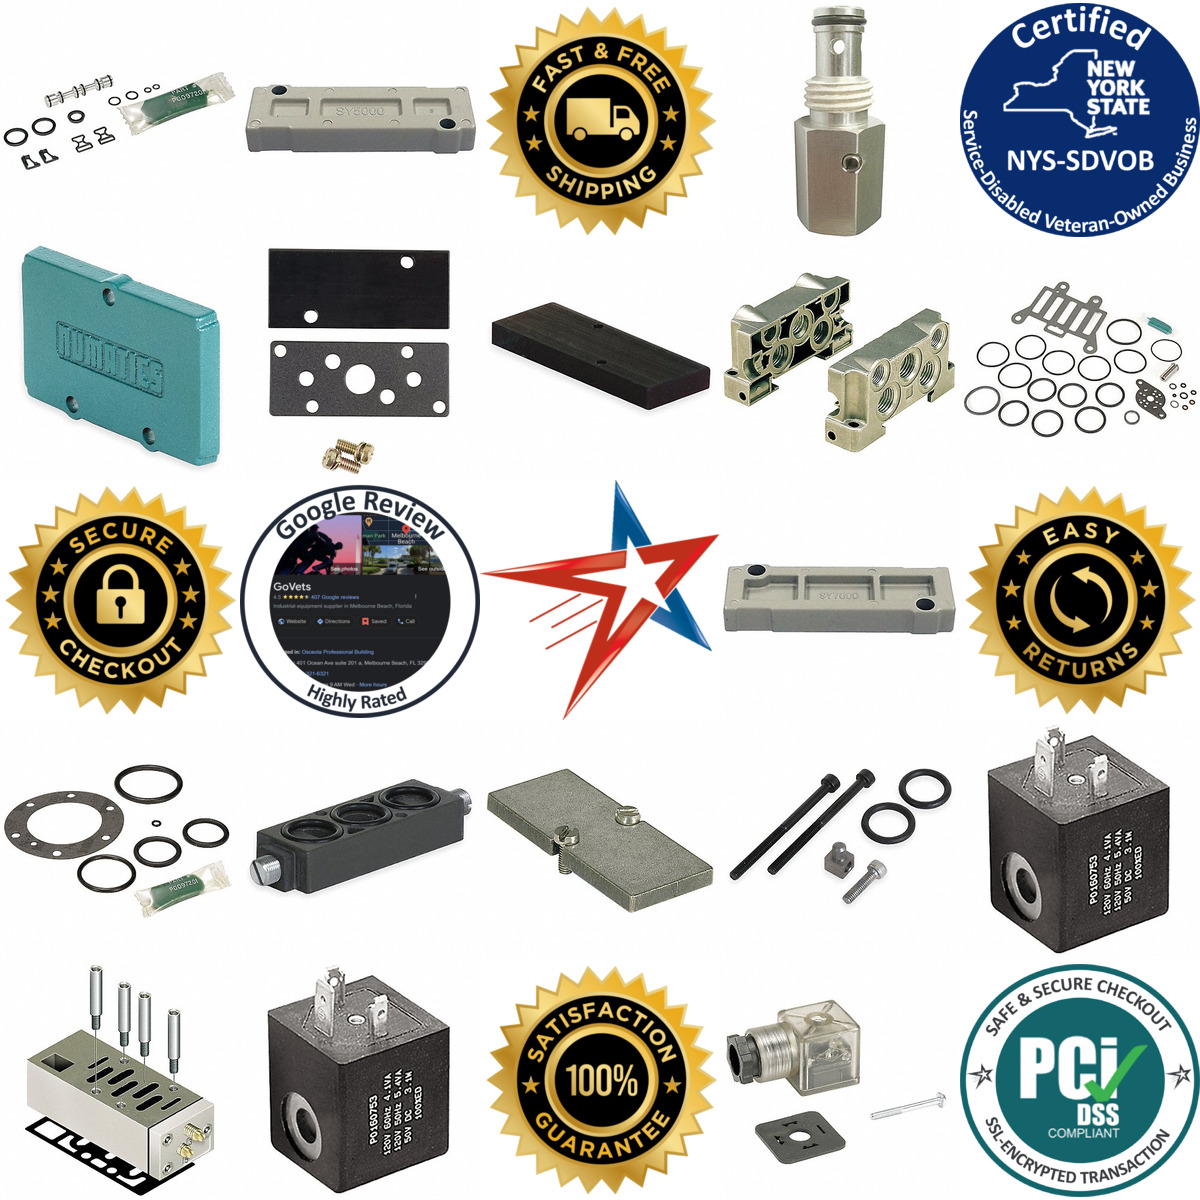 A selection of Solenoid Valve Manifold Accessories products on GoVets